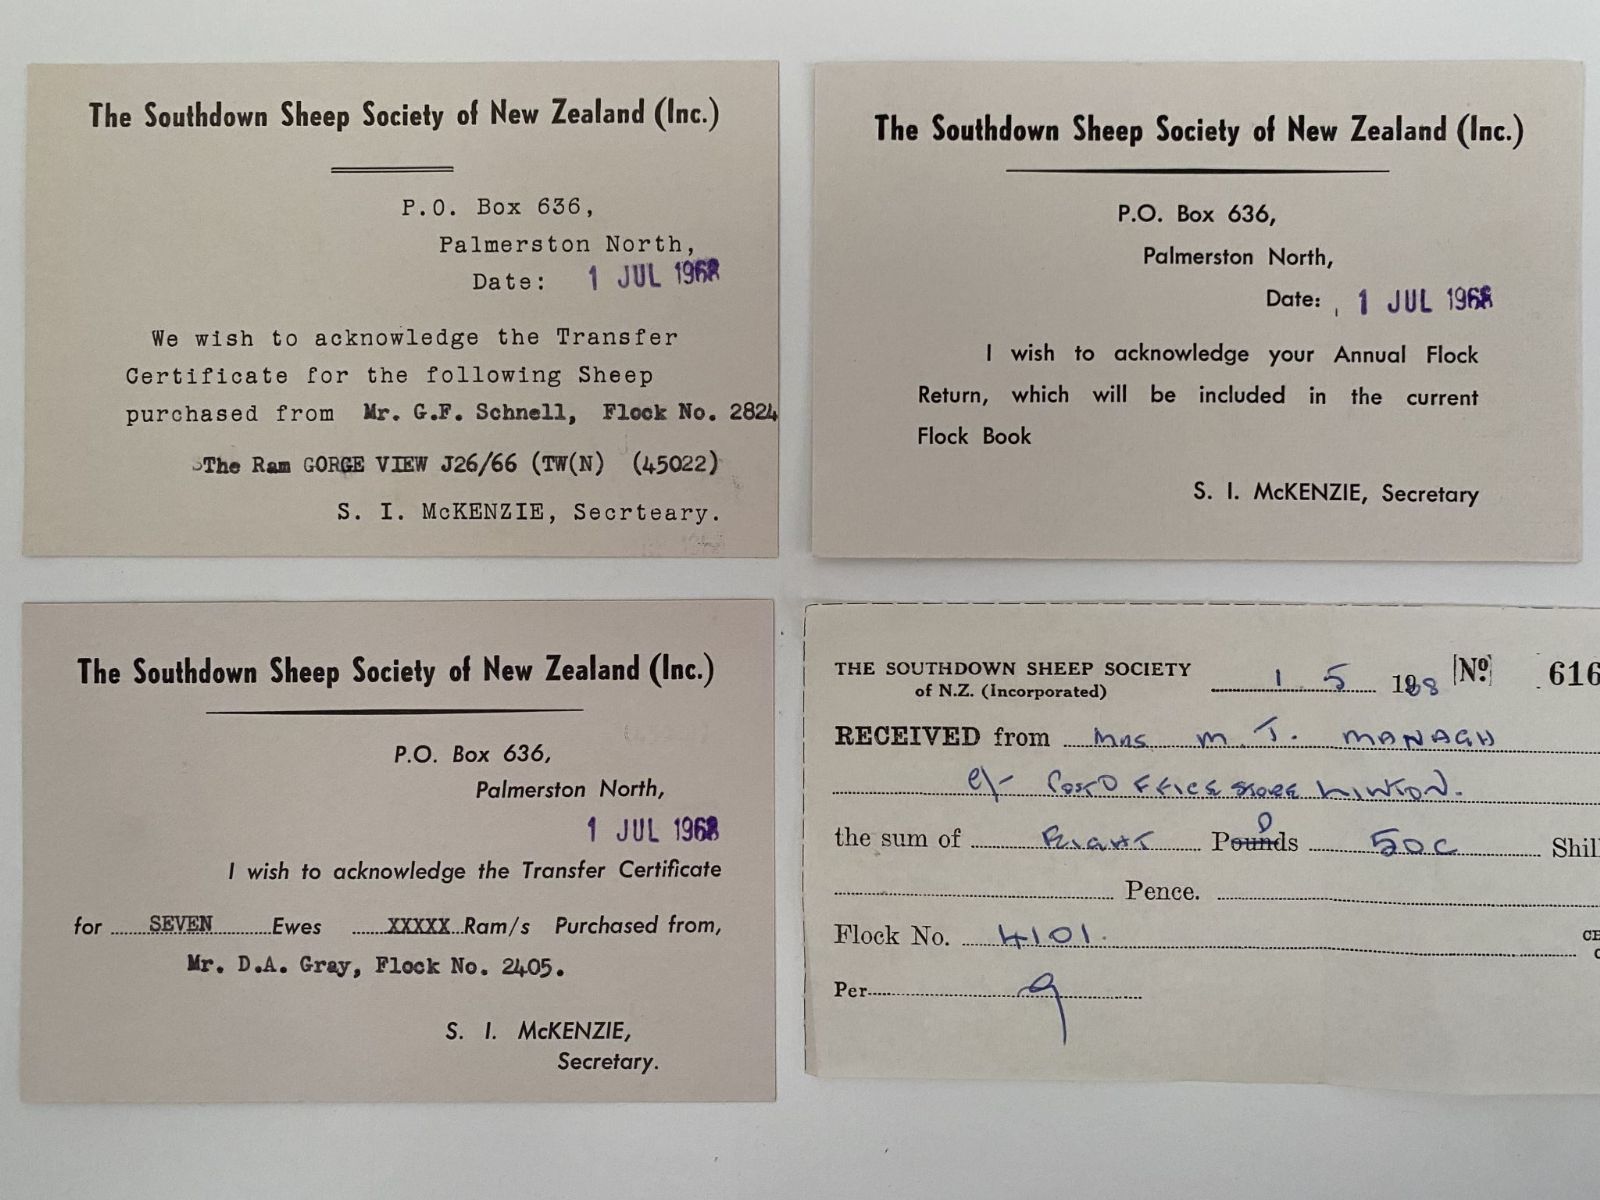 OLD RECEIPTS: The Southdown Sheep Society of New Zealand 1968